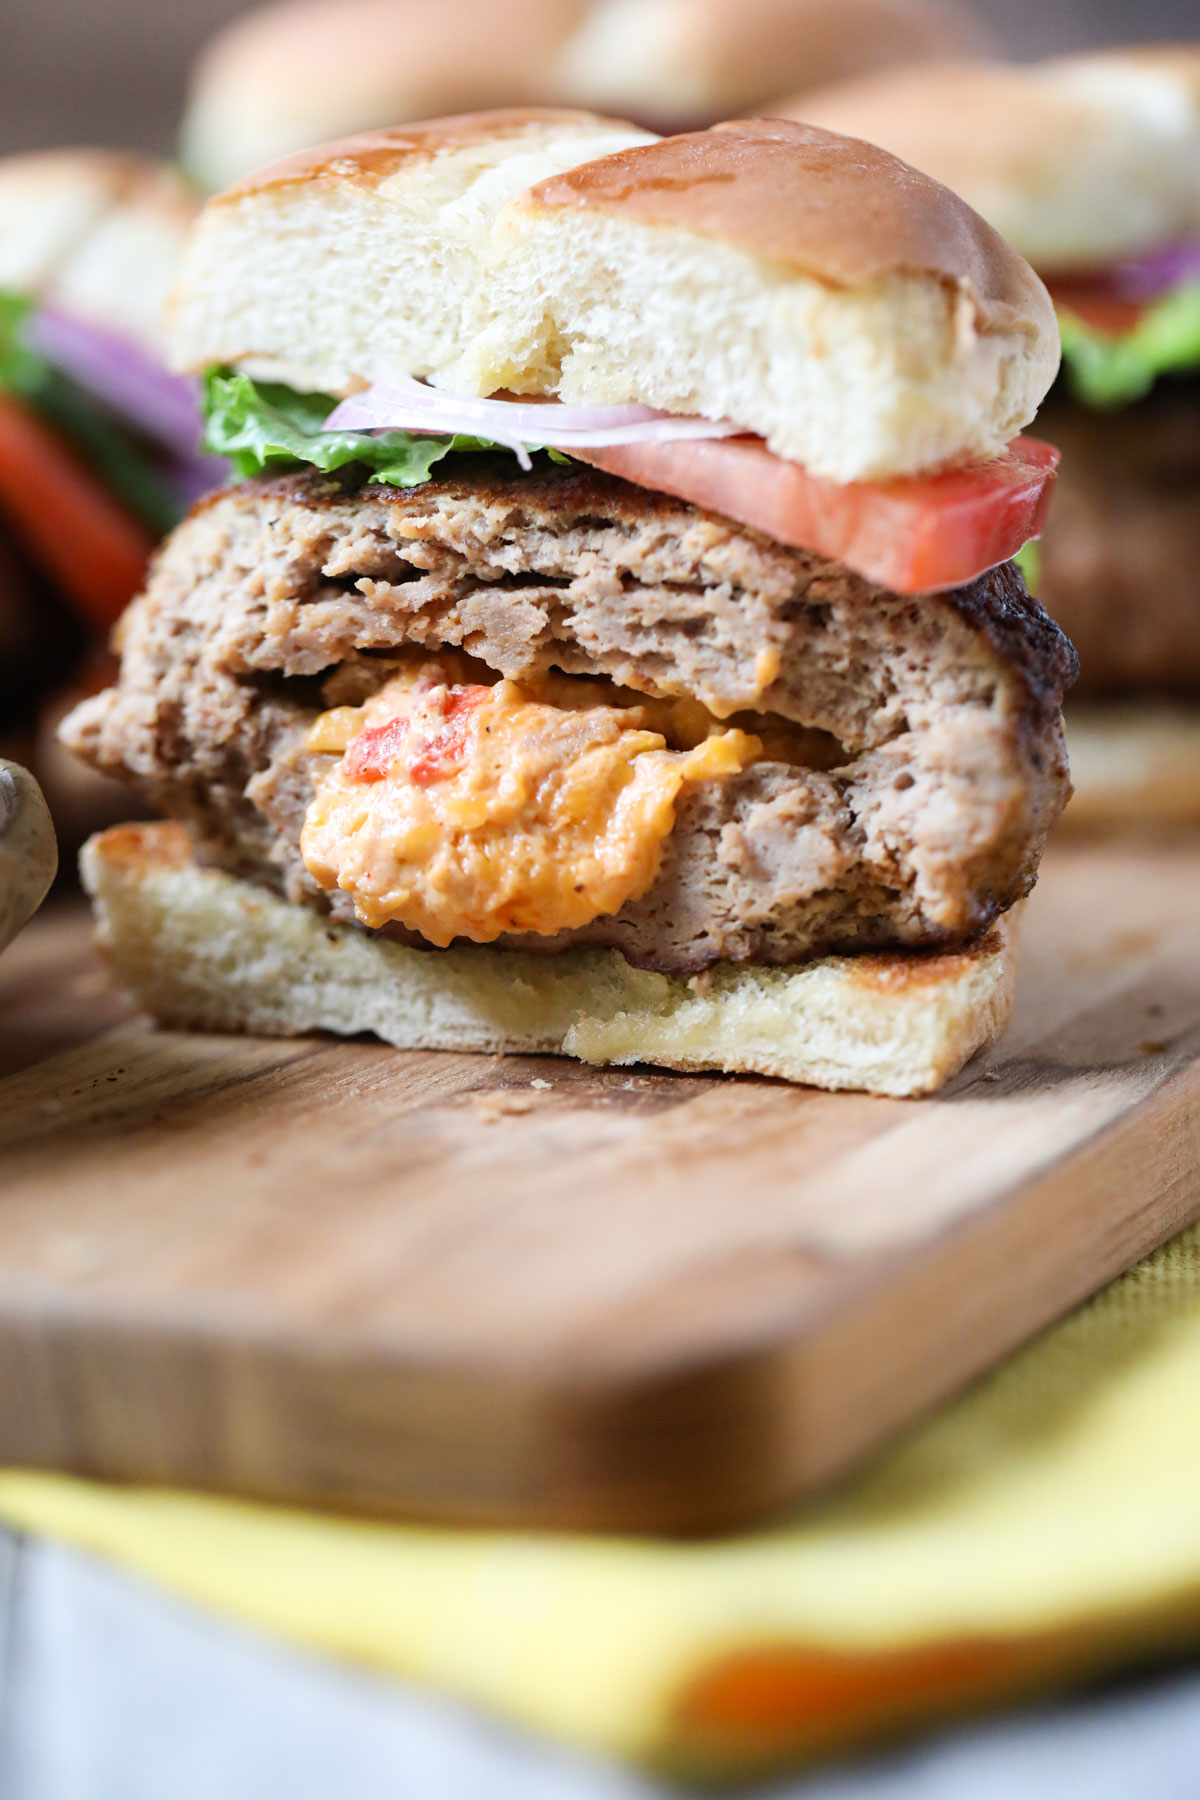 grilled pimento cheese stuffed burger cut in half on a wooden cutting board.